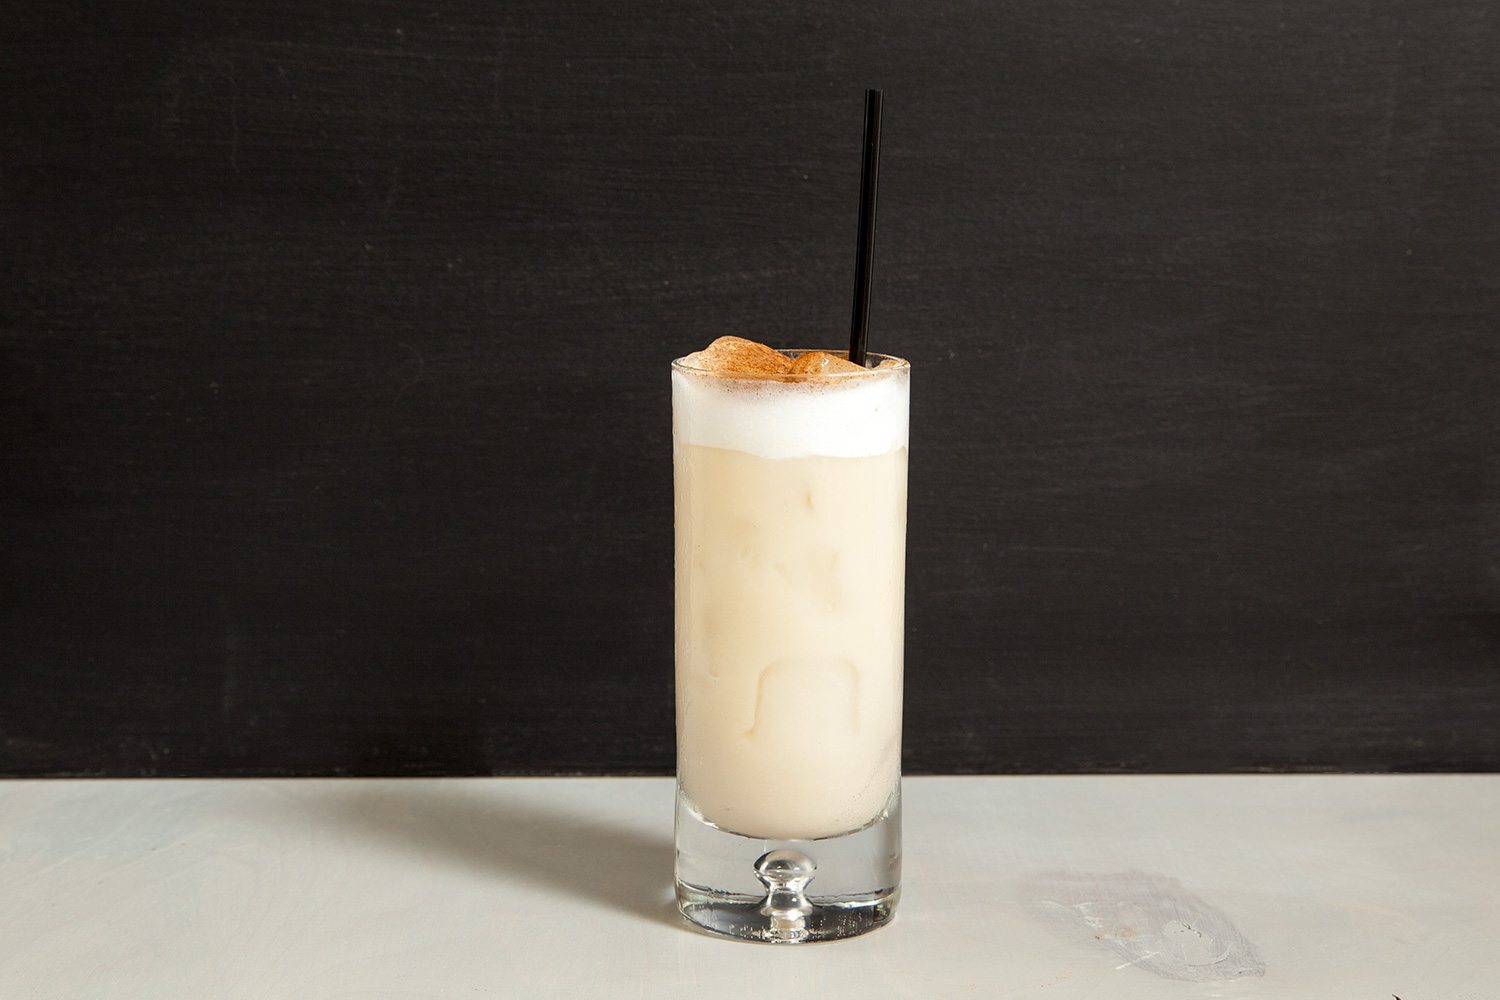 Tequila Horchata Cocktail